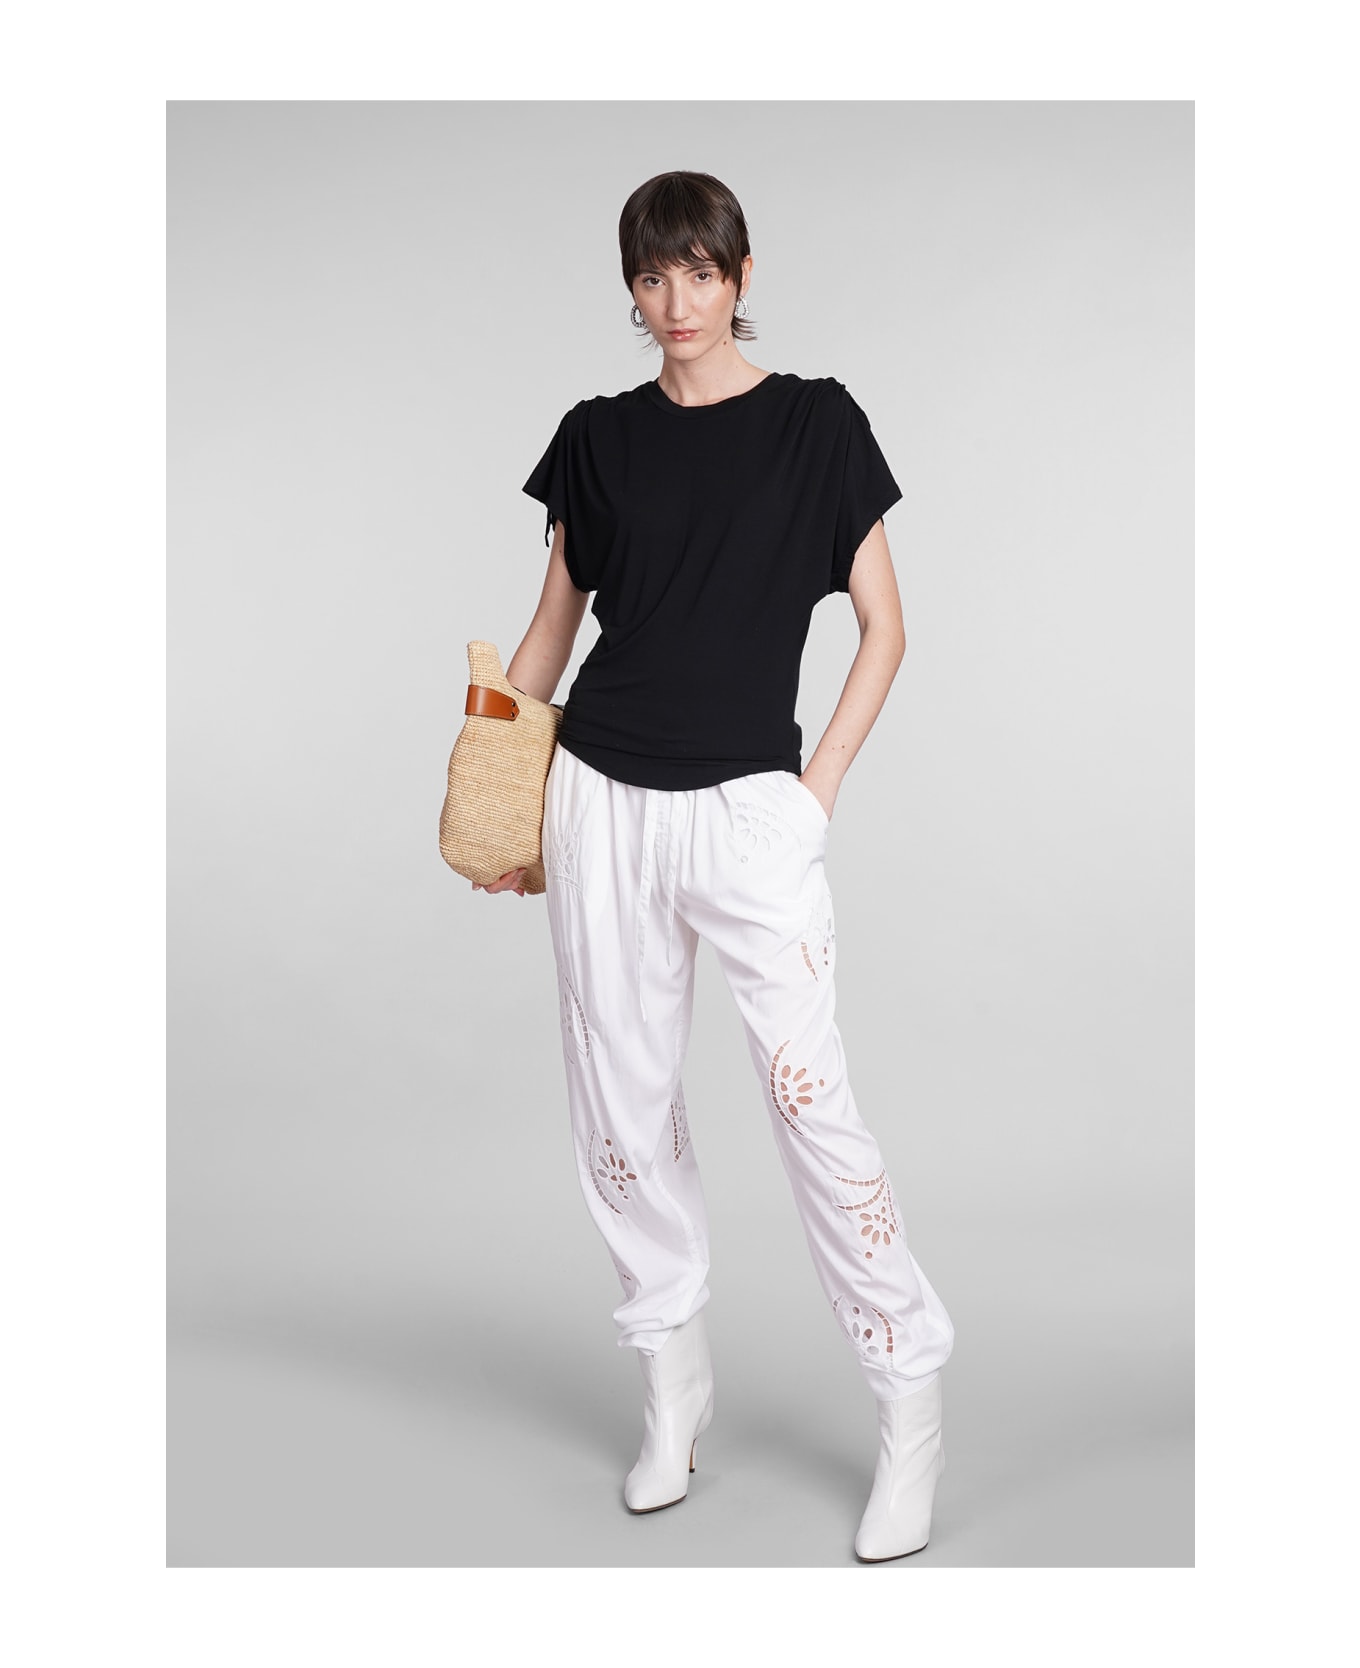 Isabel Marant Hectorina Pants In White Modal - white ボトムス